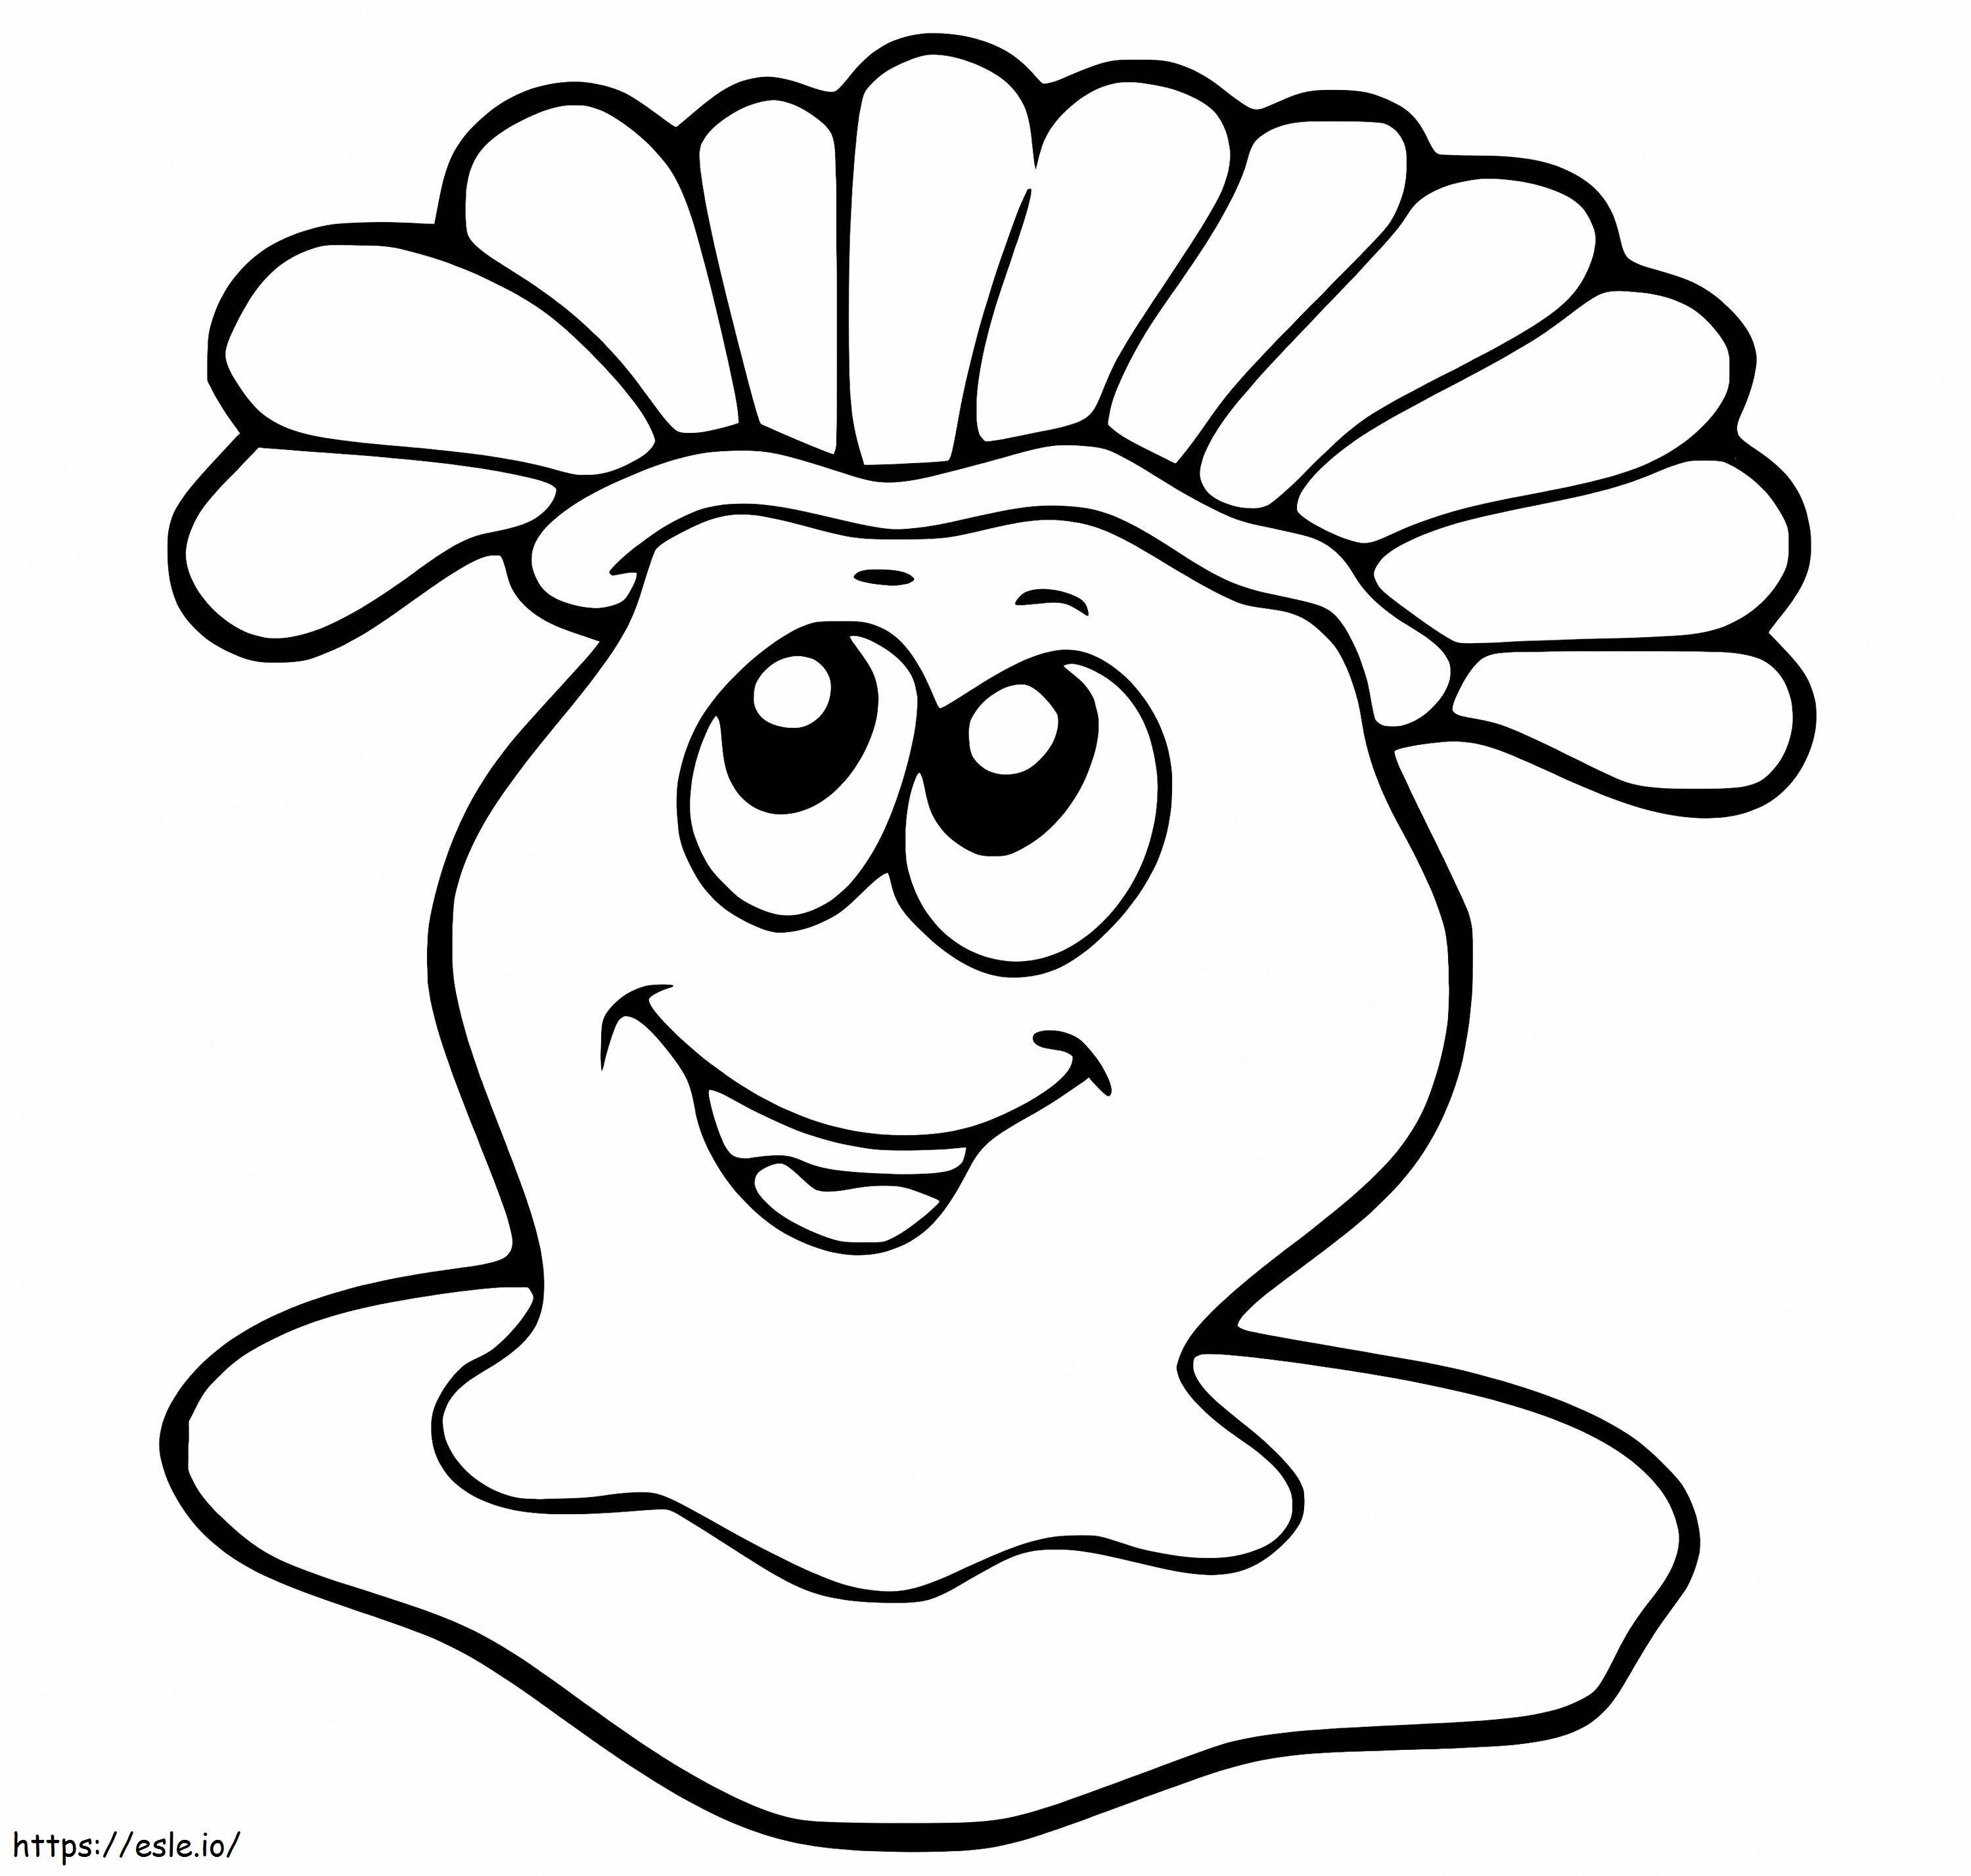 Little Sea Anemone coloring page